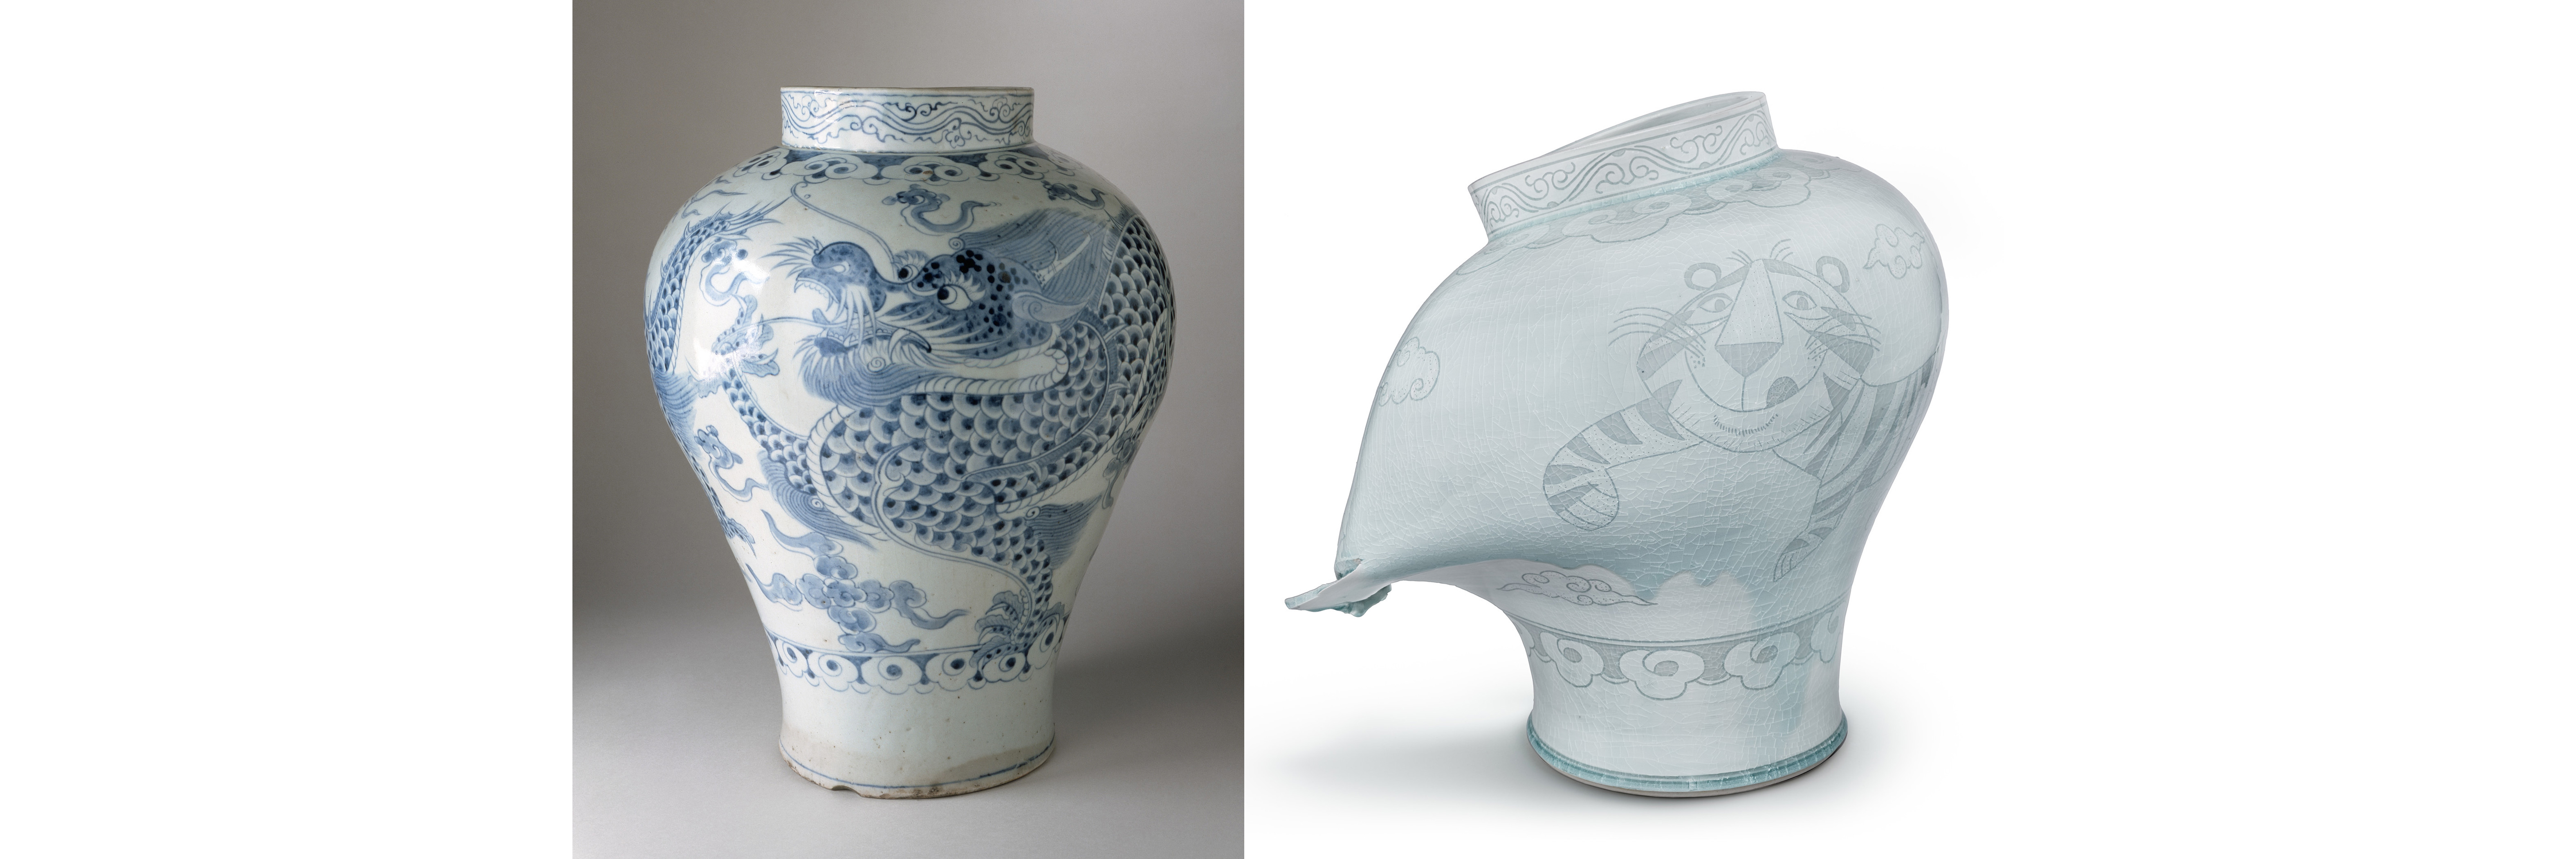 Unknown, Jar with Dragon and Clouds, 1700-1800, Los Angeles County Museum of Art, purchased with Museum Funds, photo © Museum Associates/LACMA